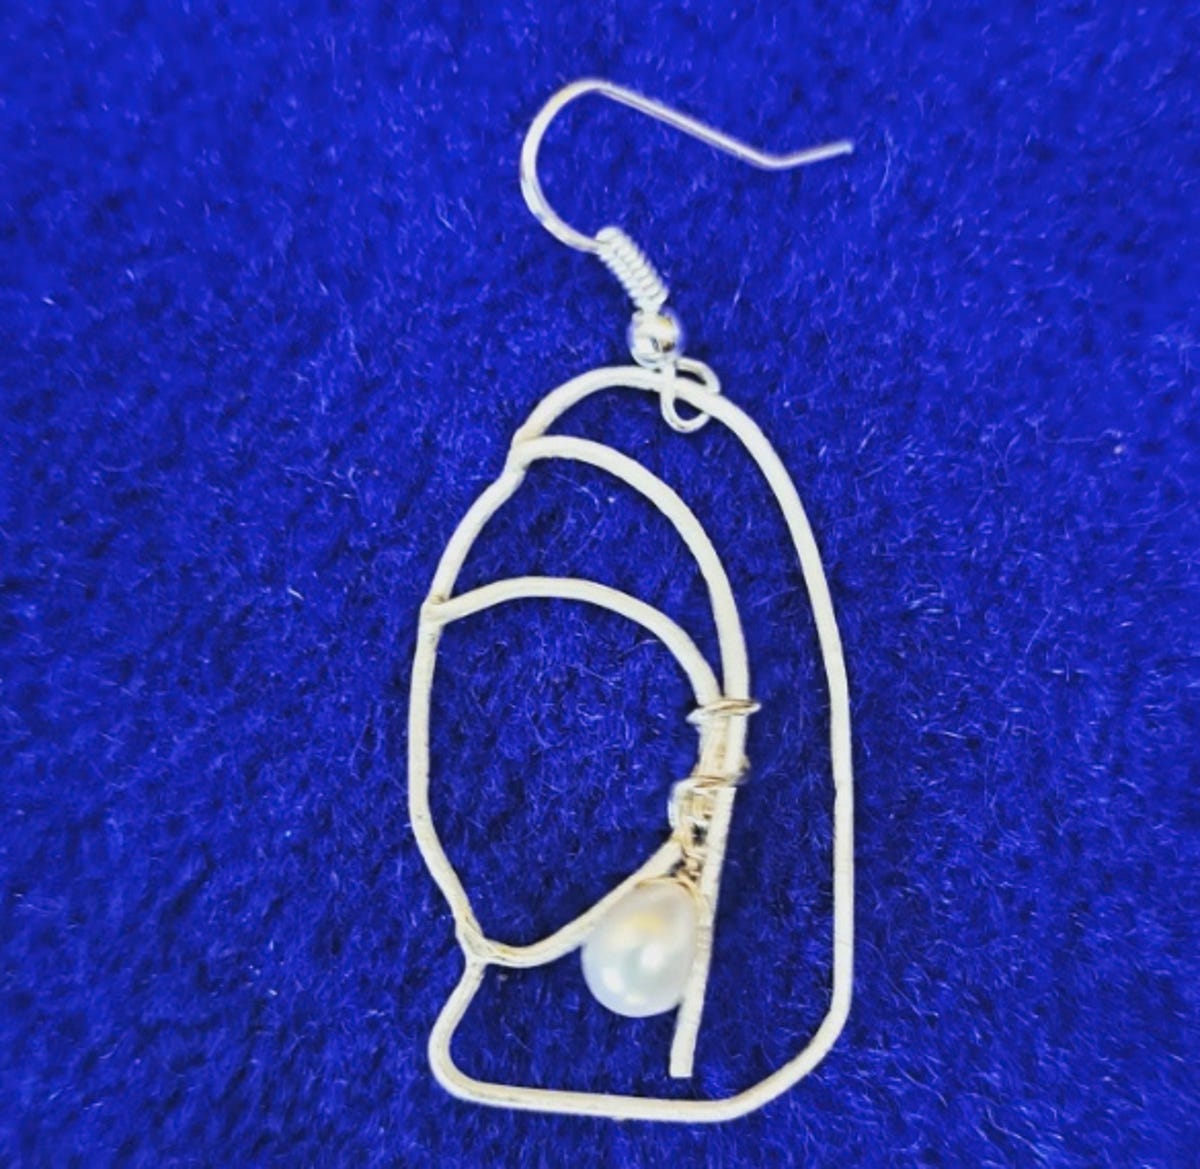 An earring in the shape of the painting Girl with a Pearl Earring